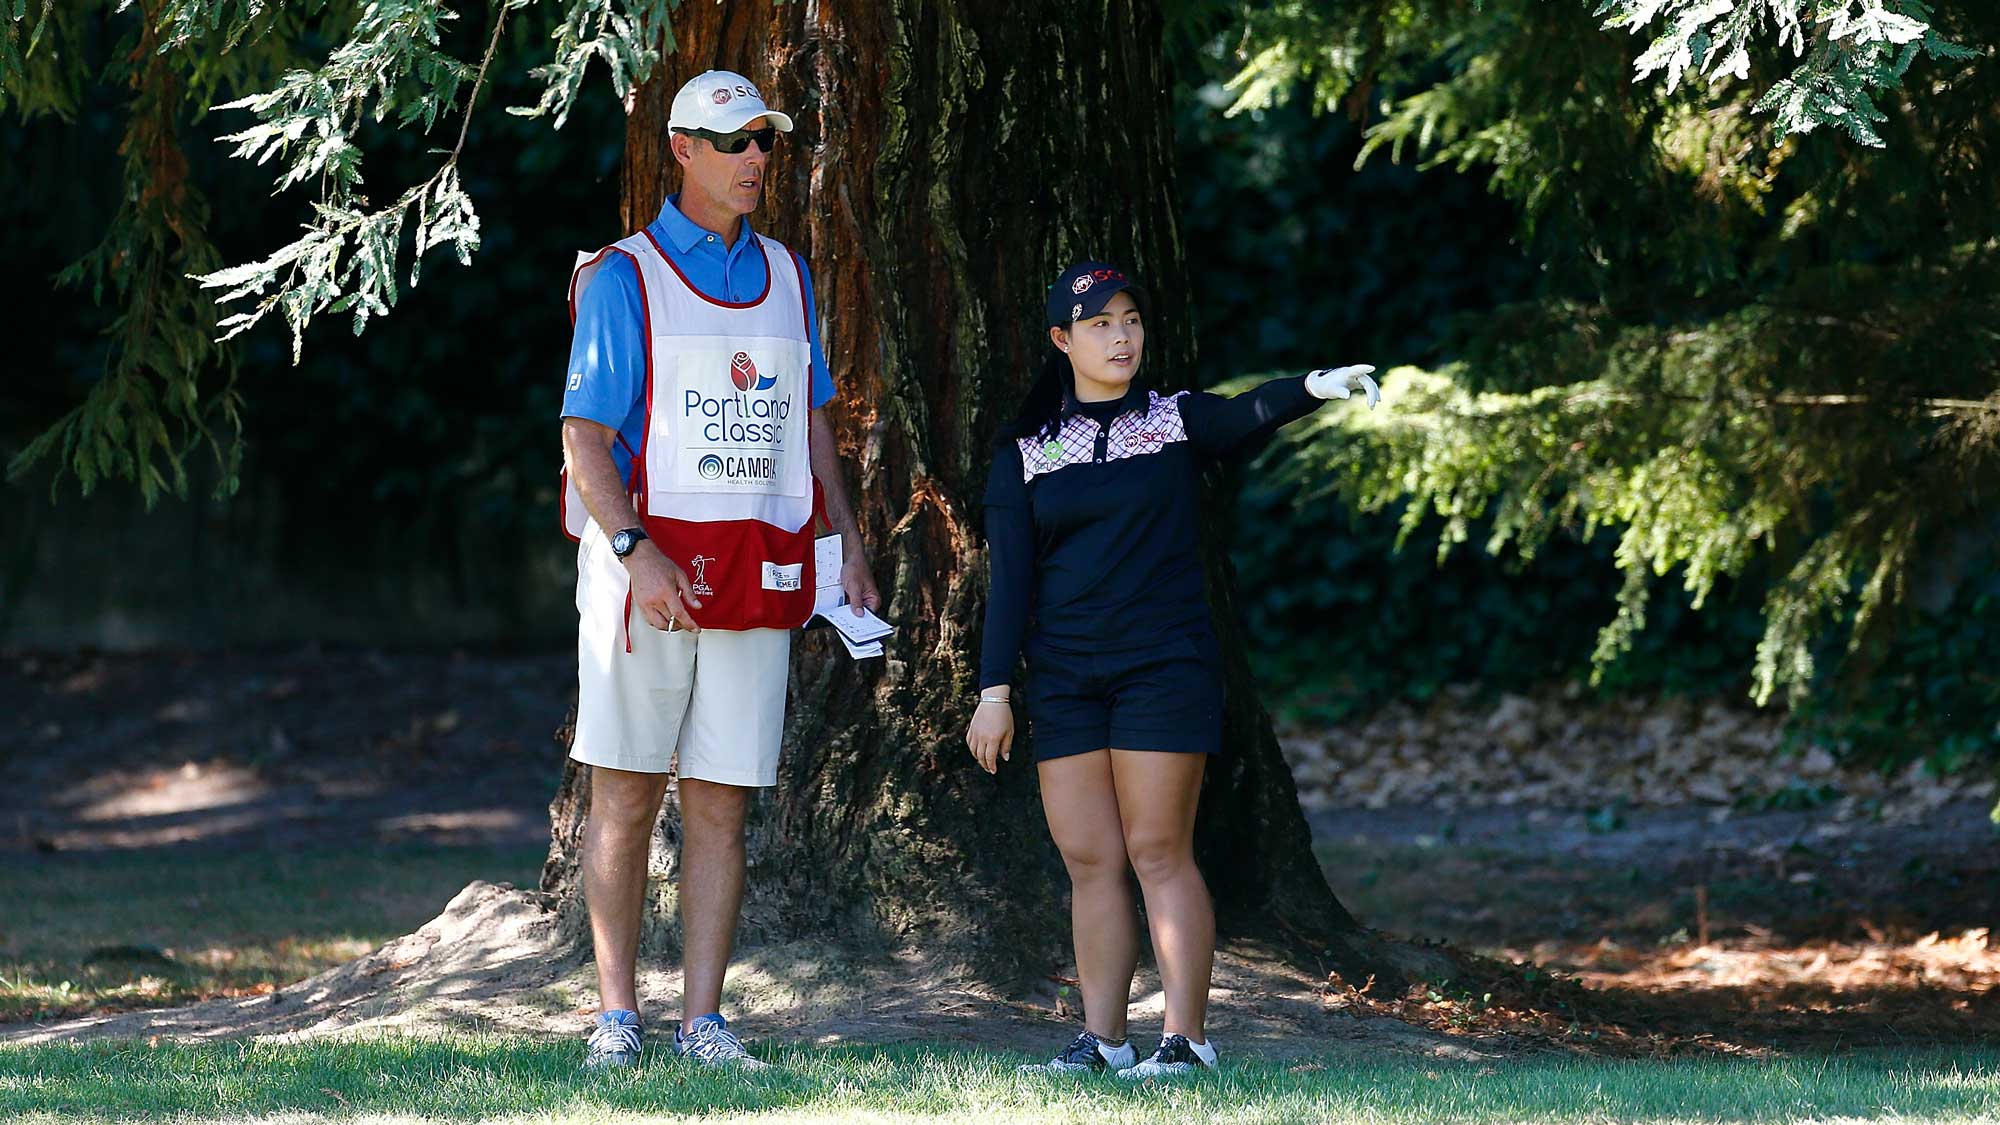 Moriya Jutanugarn of Thailand talks to her caddie on the 9th hole during the third round of the LPGA Cambia Portland Classic